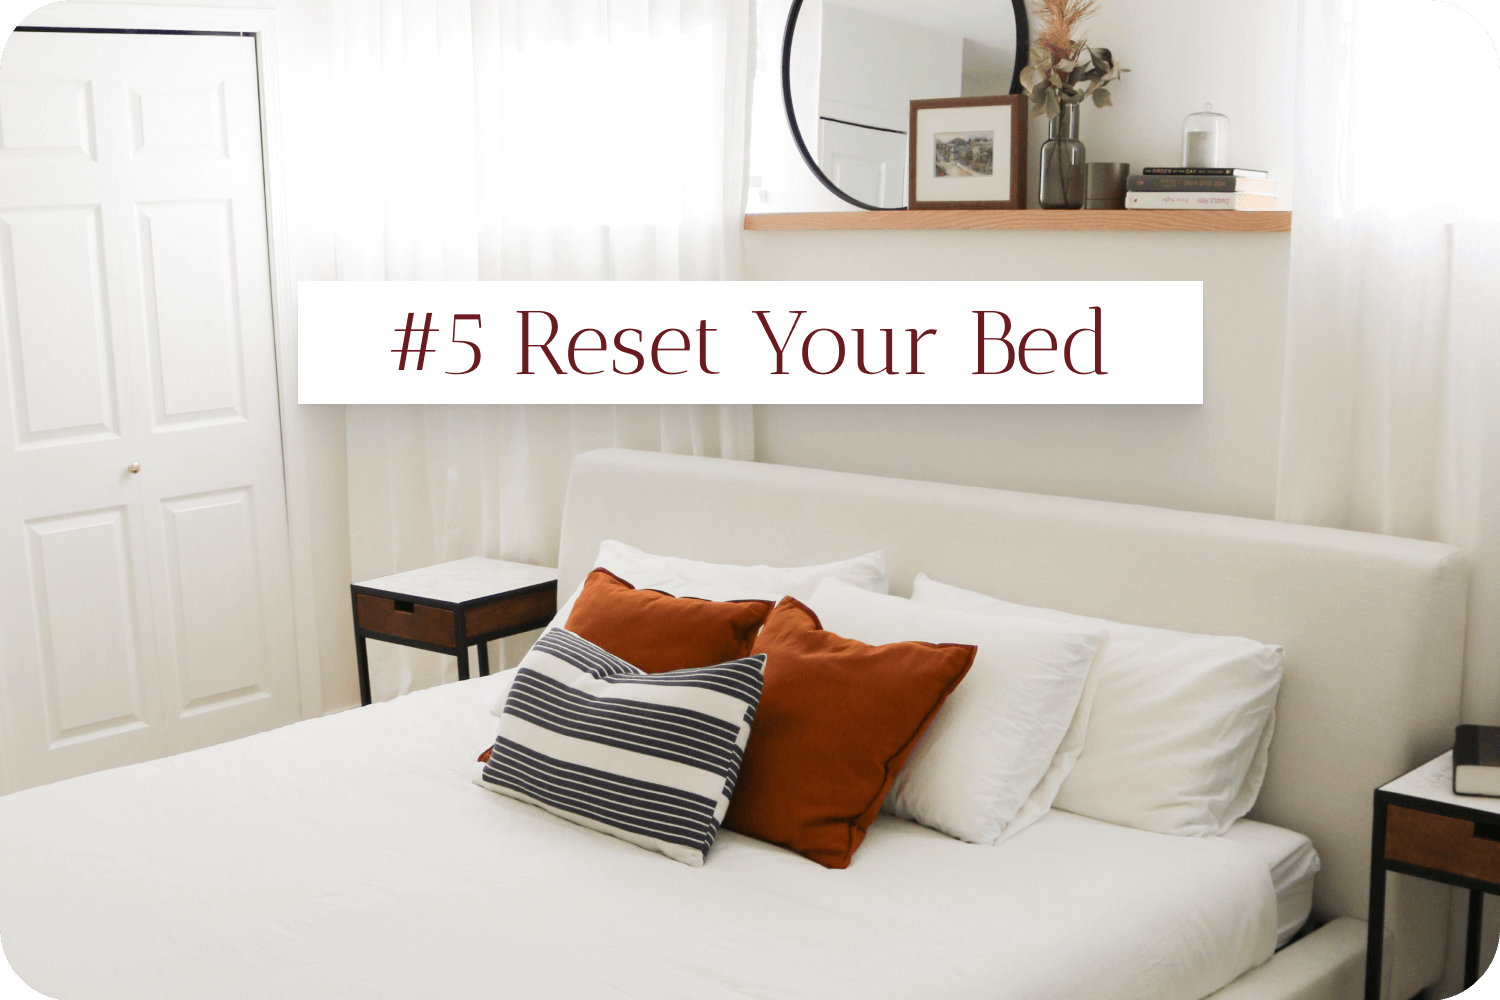 #5 Reset Your Bed